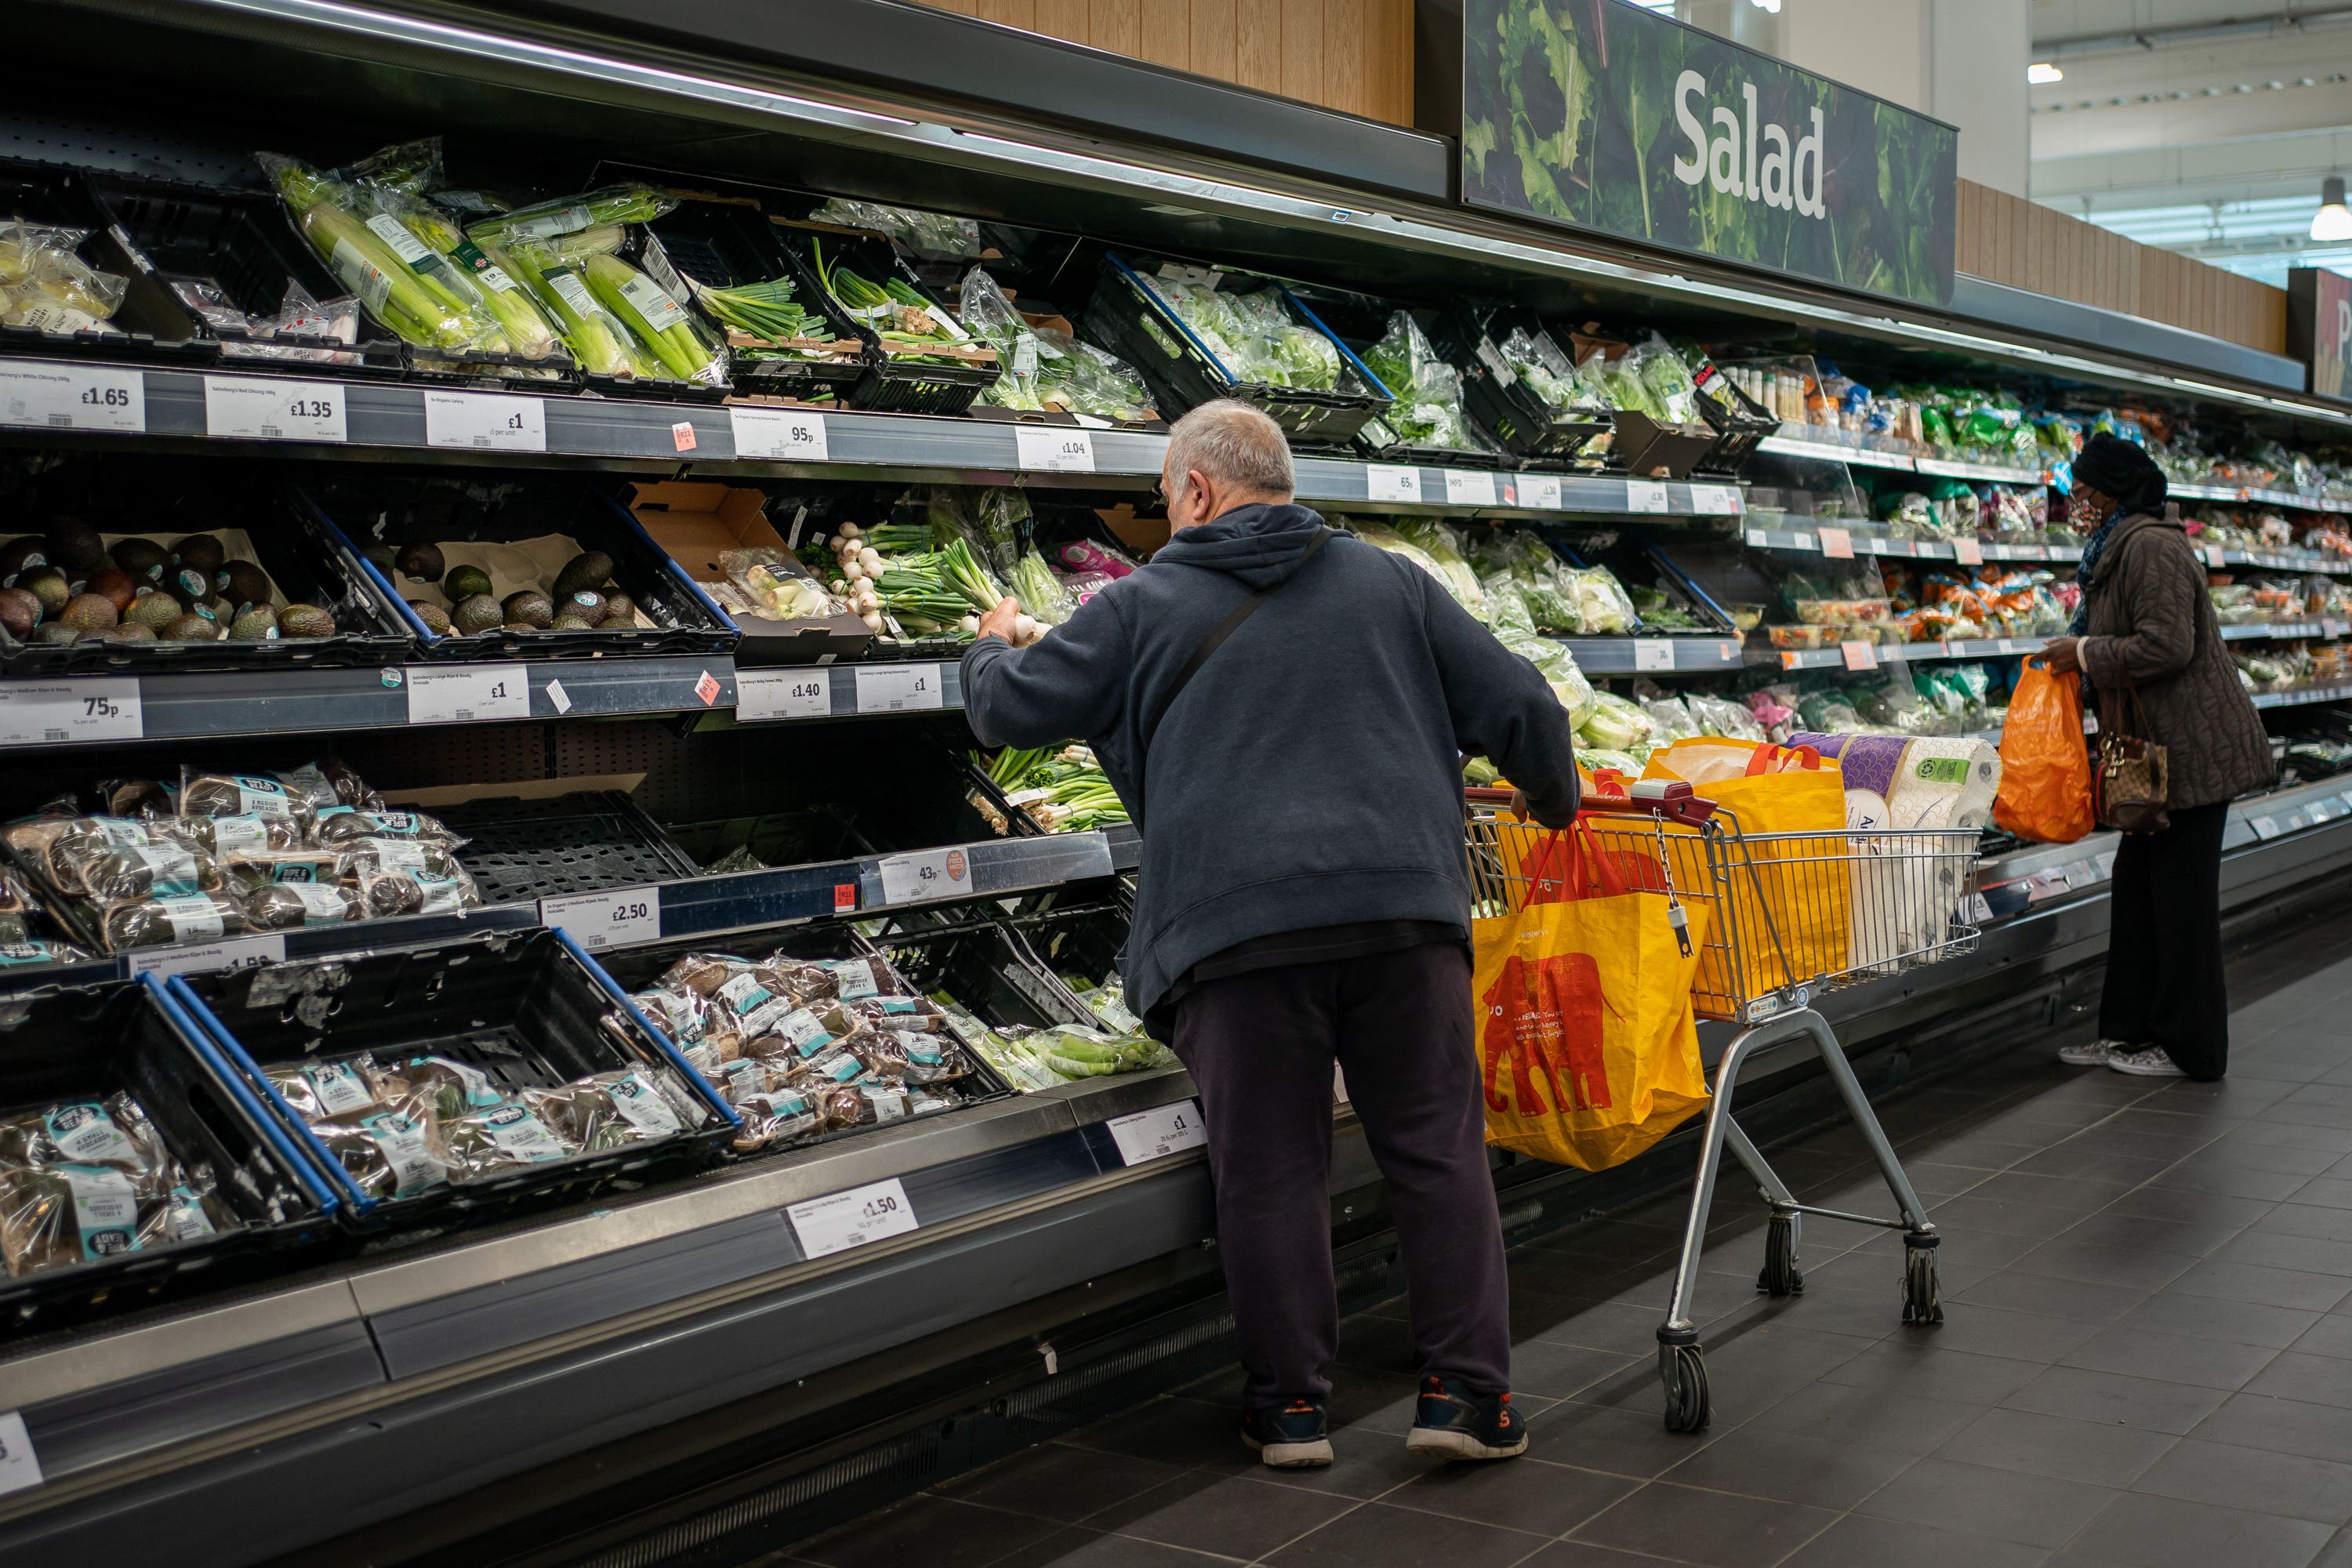 Hopes have mounted that the worst of the cost crisis is now behind us as official figures showed UK inflation eased back last month, but households remained under pressure due to sky-high food and energy bills.